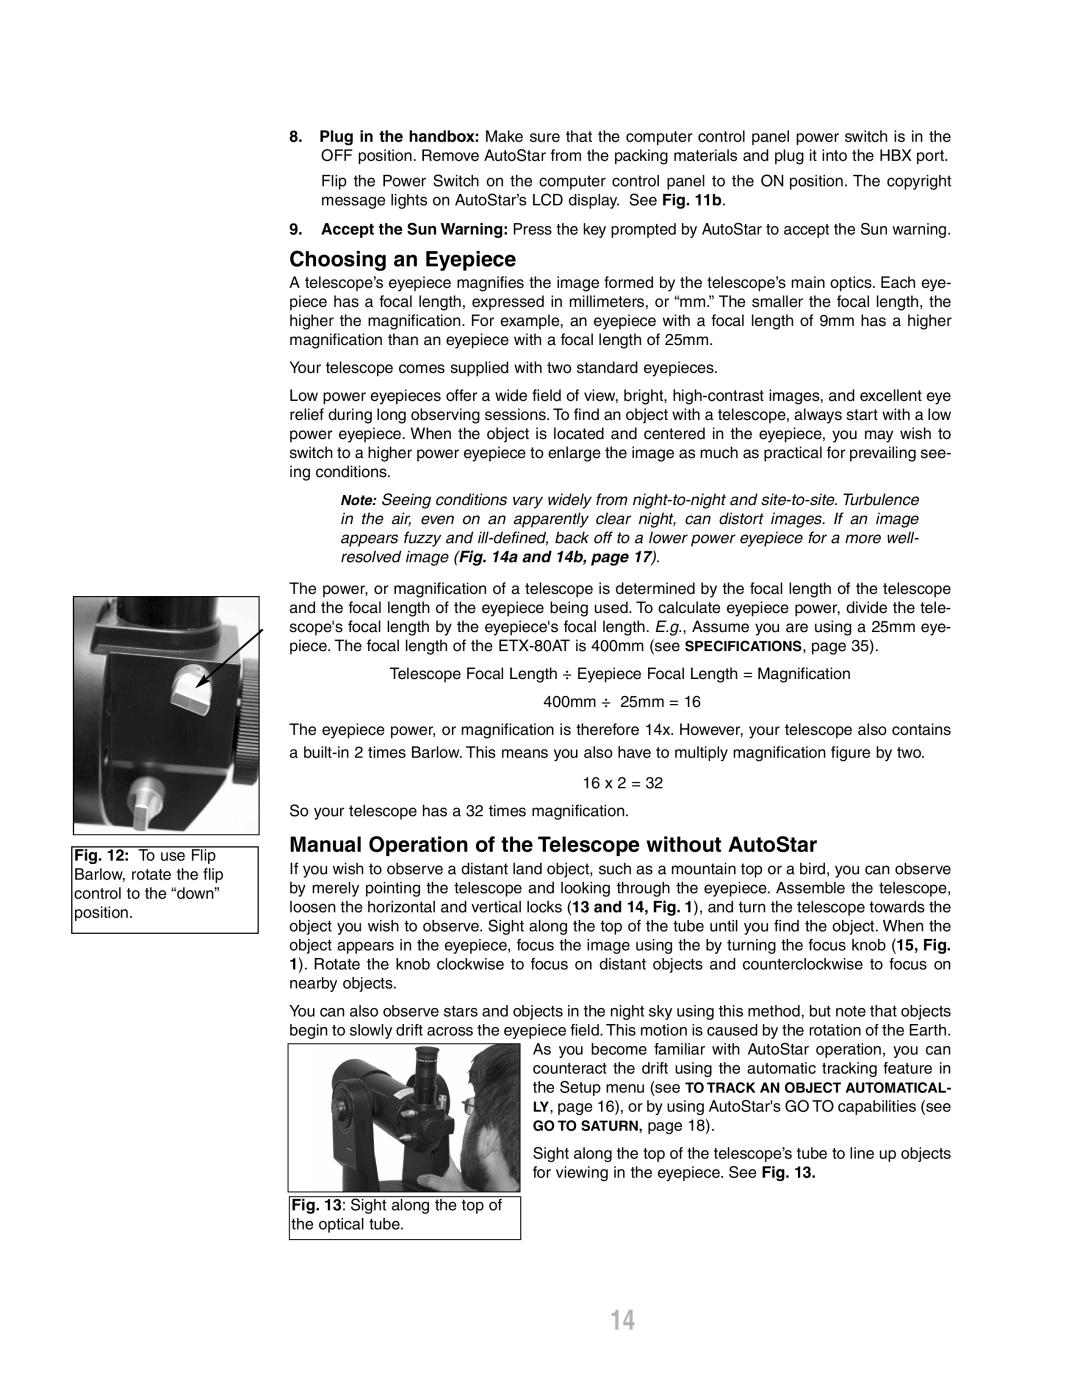 Meade ETX-80AT-TC instruction manual Choosing an Eyepiece, Manual Operation of the Telescope without AutoStar 